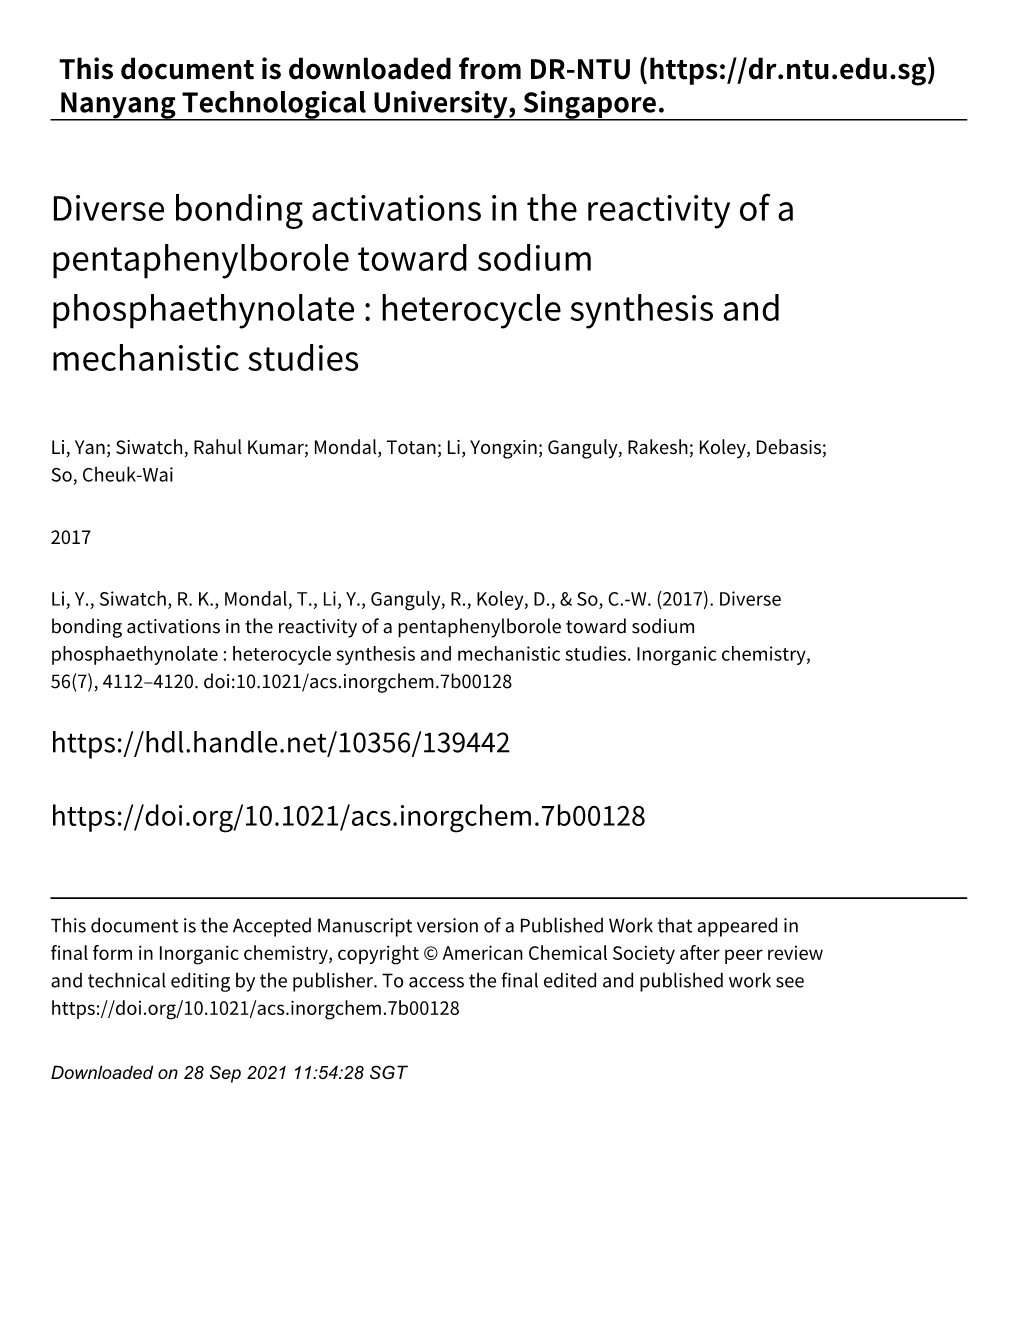 Diverse Bonding Activations in the Reactivity of a Pentaphenylborole Toward Sodium Phosphaethynolate : Heterocycle Synthesis and Mechanistic Studies